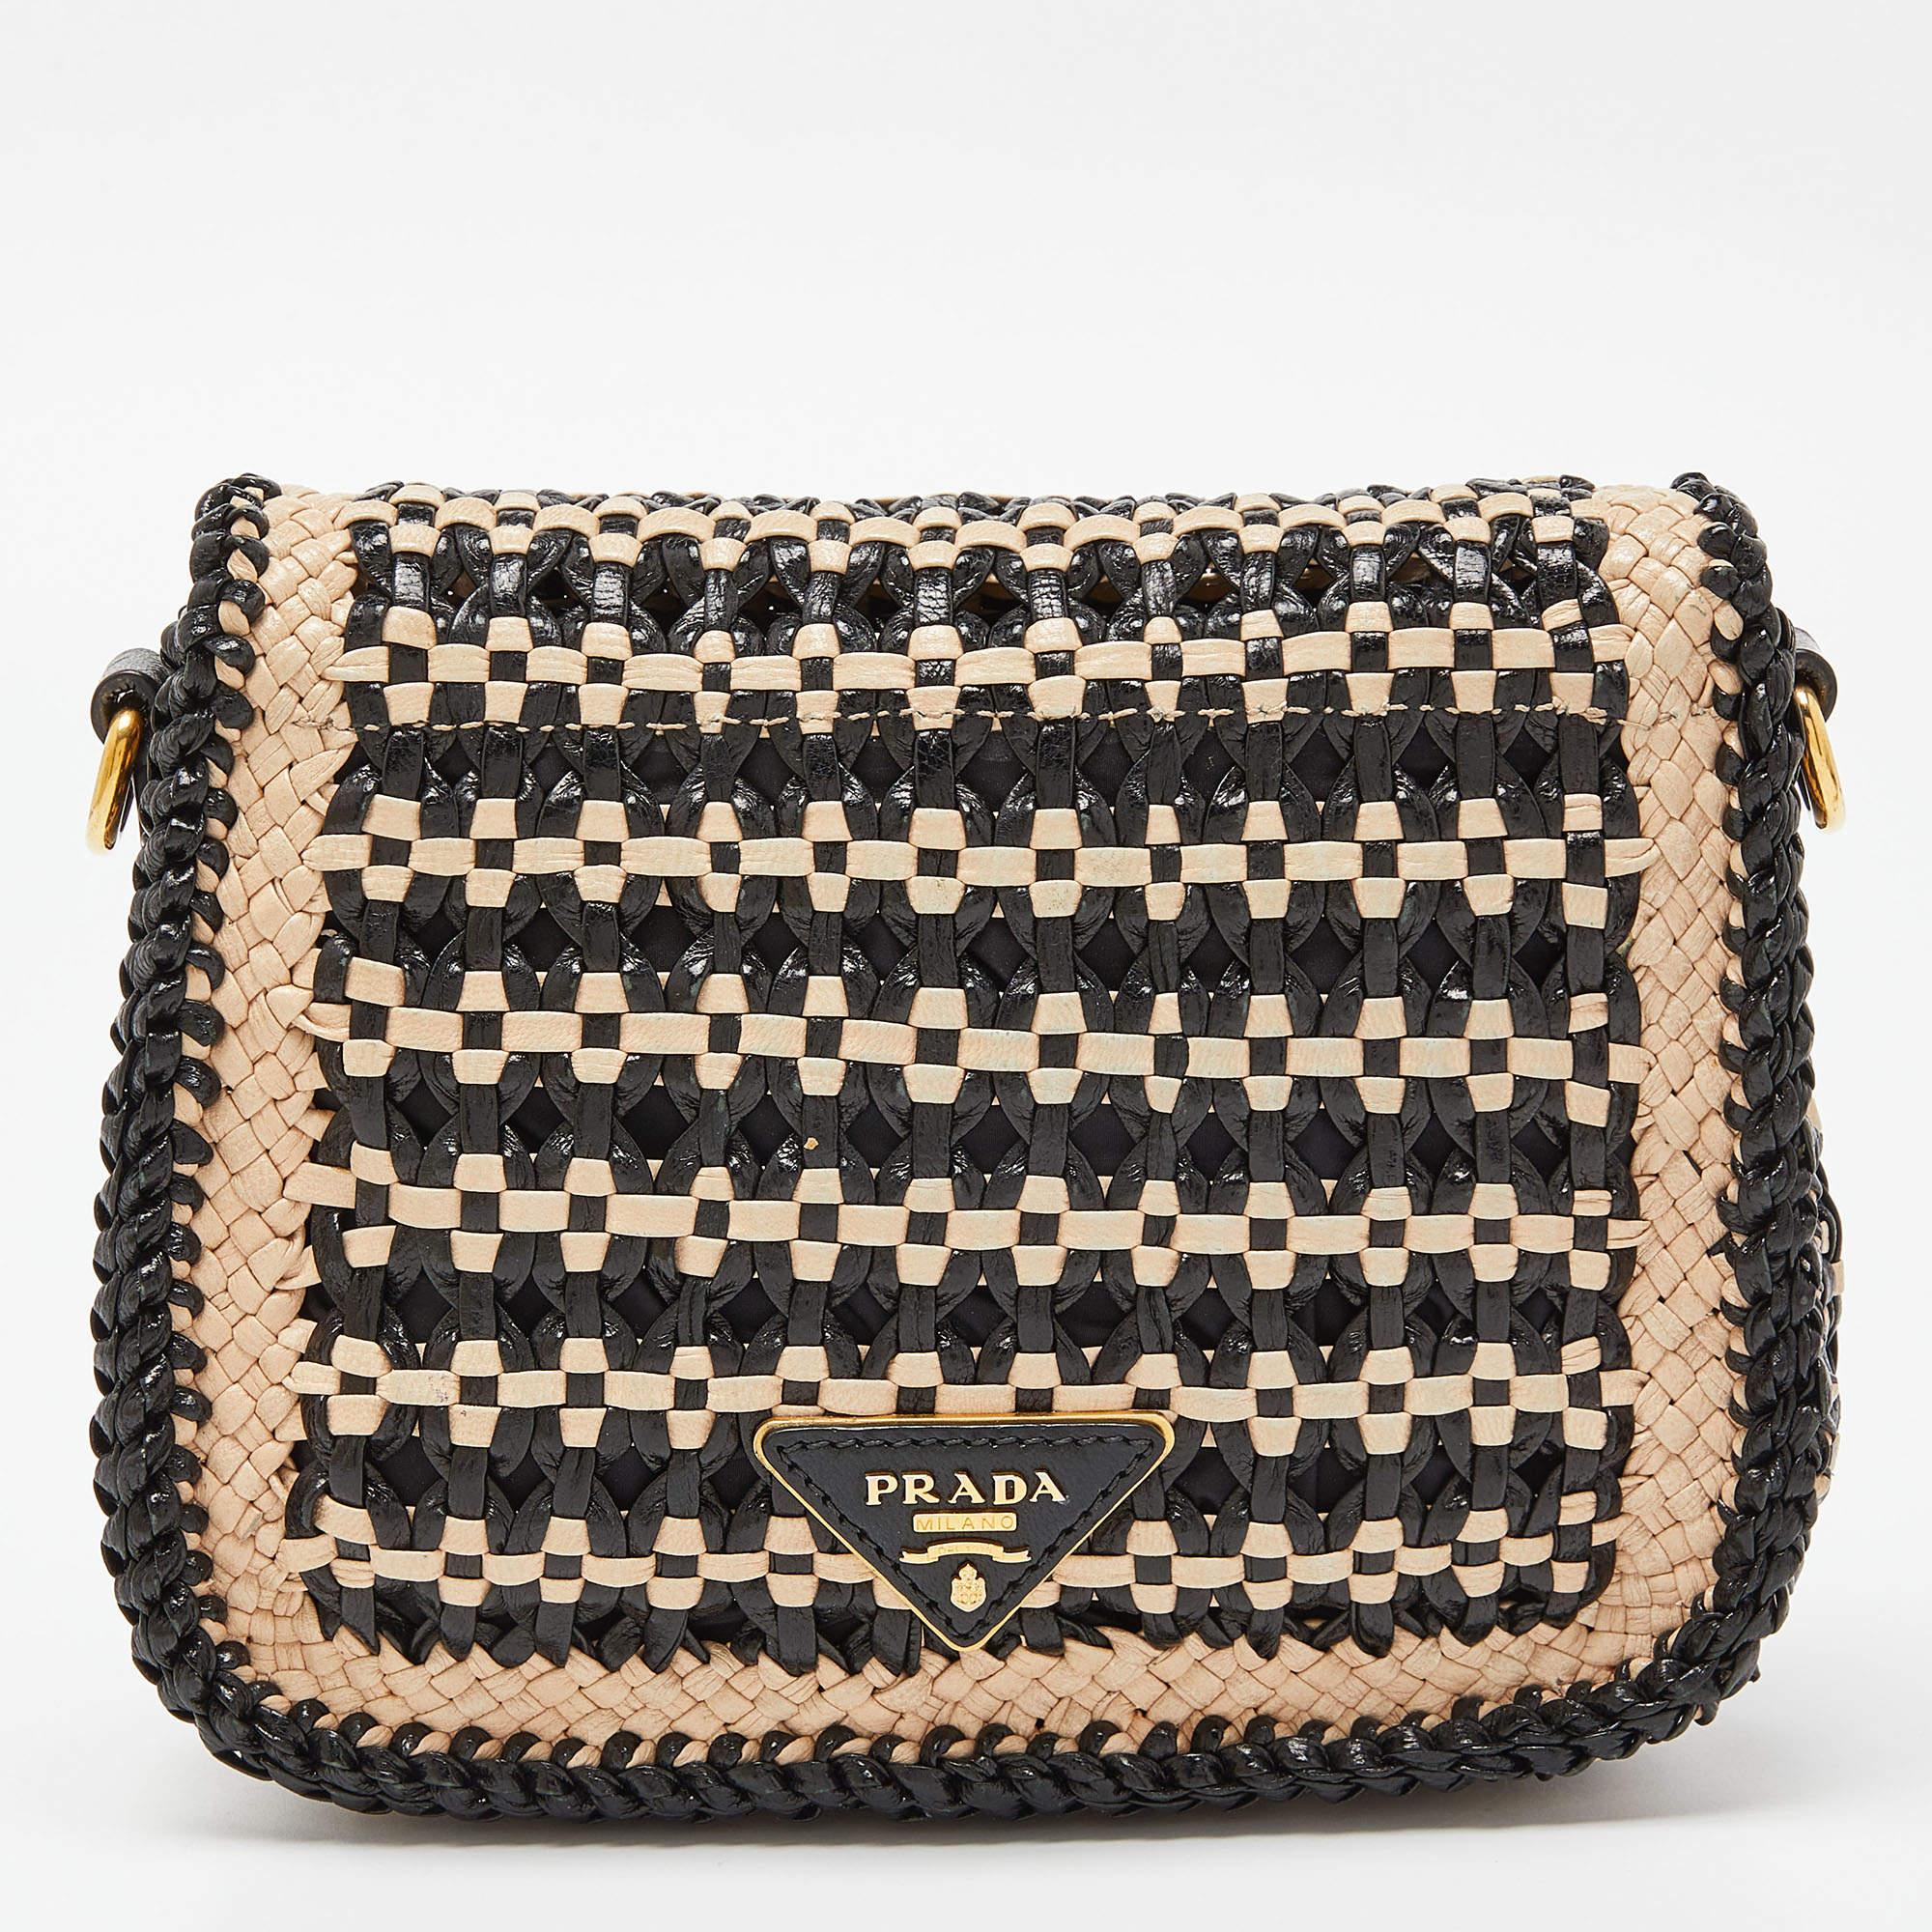 Express your personal style with this high-end crossbody bag. Crafted from quality materials, it has been added with fine details and is finished perfectly. It features a well-sized interior.

Includes: Original Box, Authenticity Card, Info Booklet